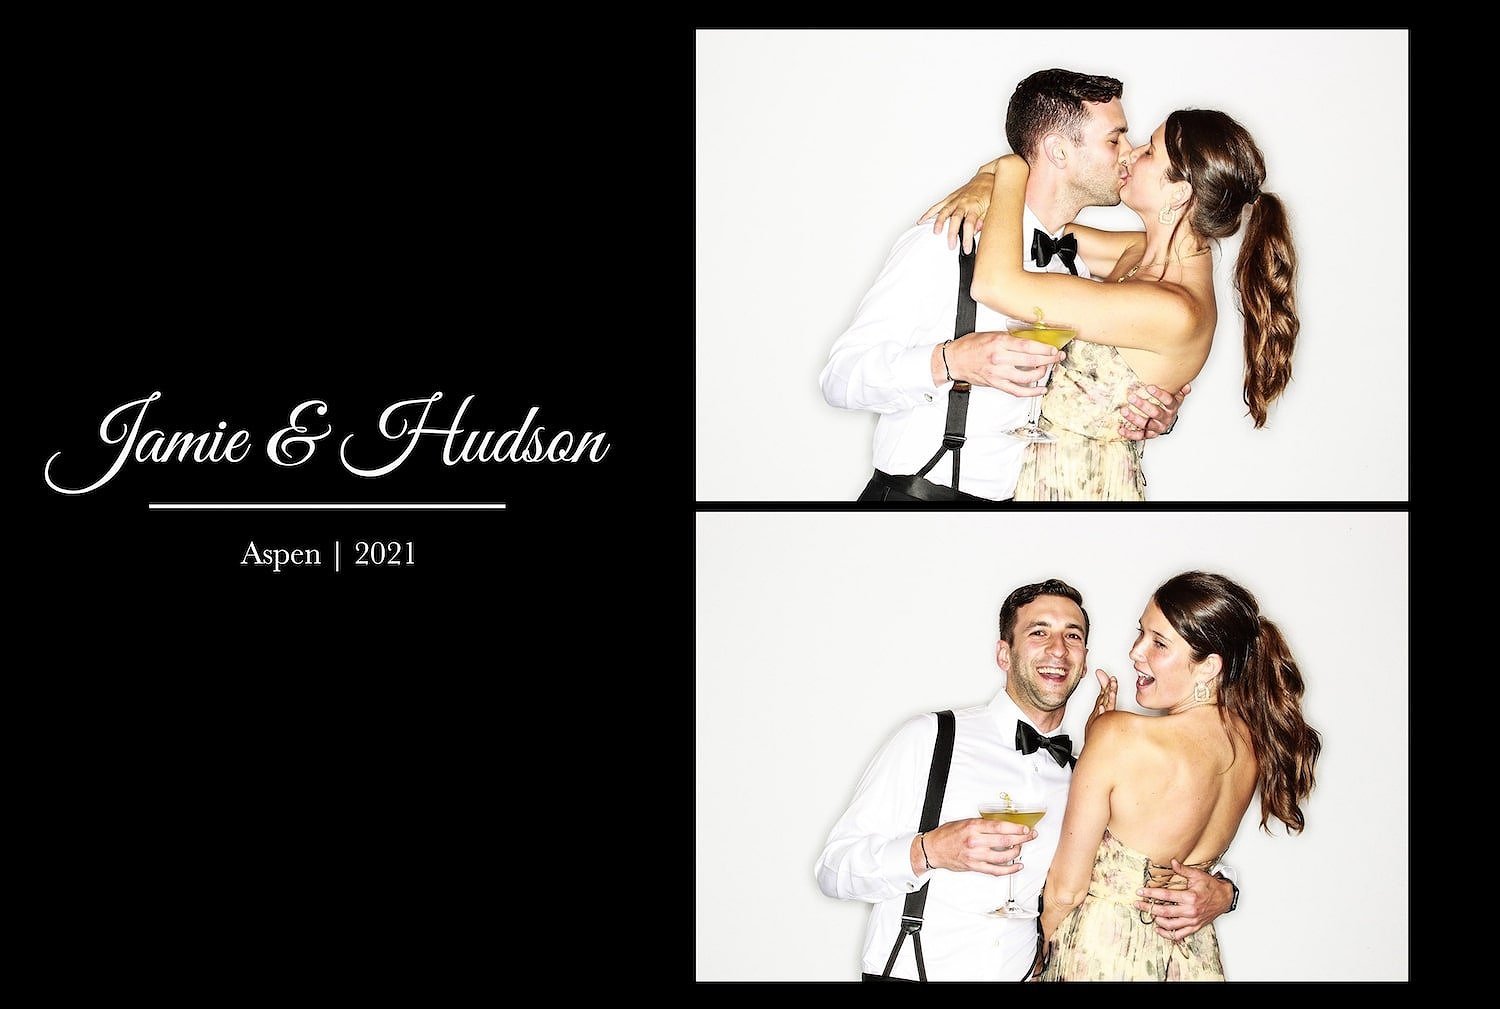 SocialLight Photo, Photo Booth For Wedding, Black And White Photo Booth Wedding, Private Photo Booth